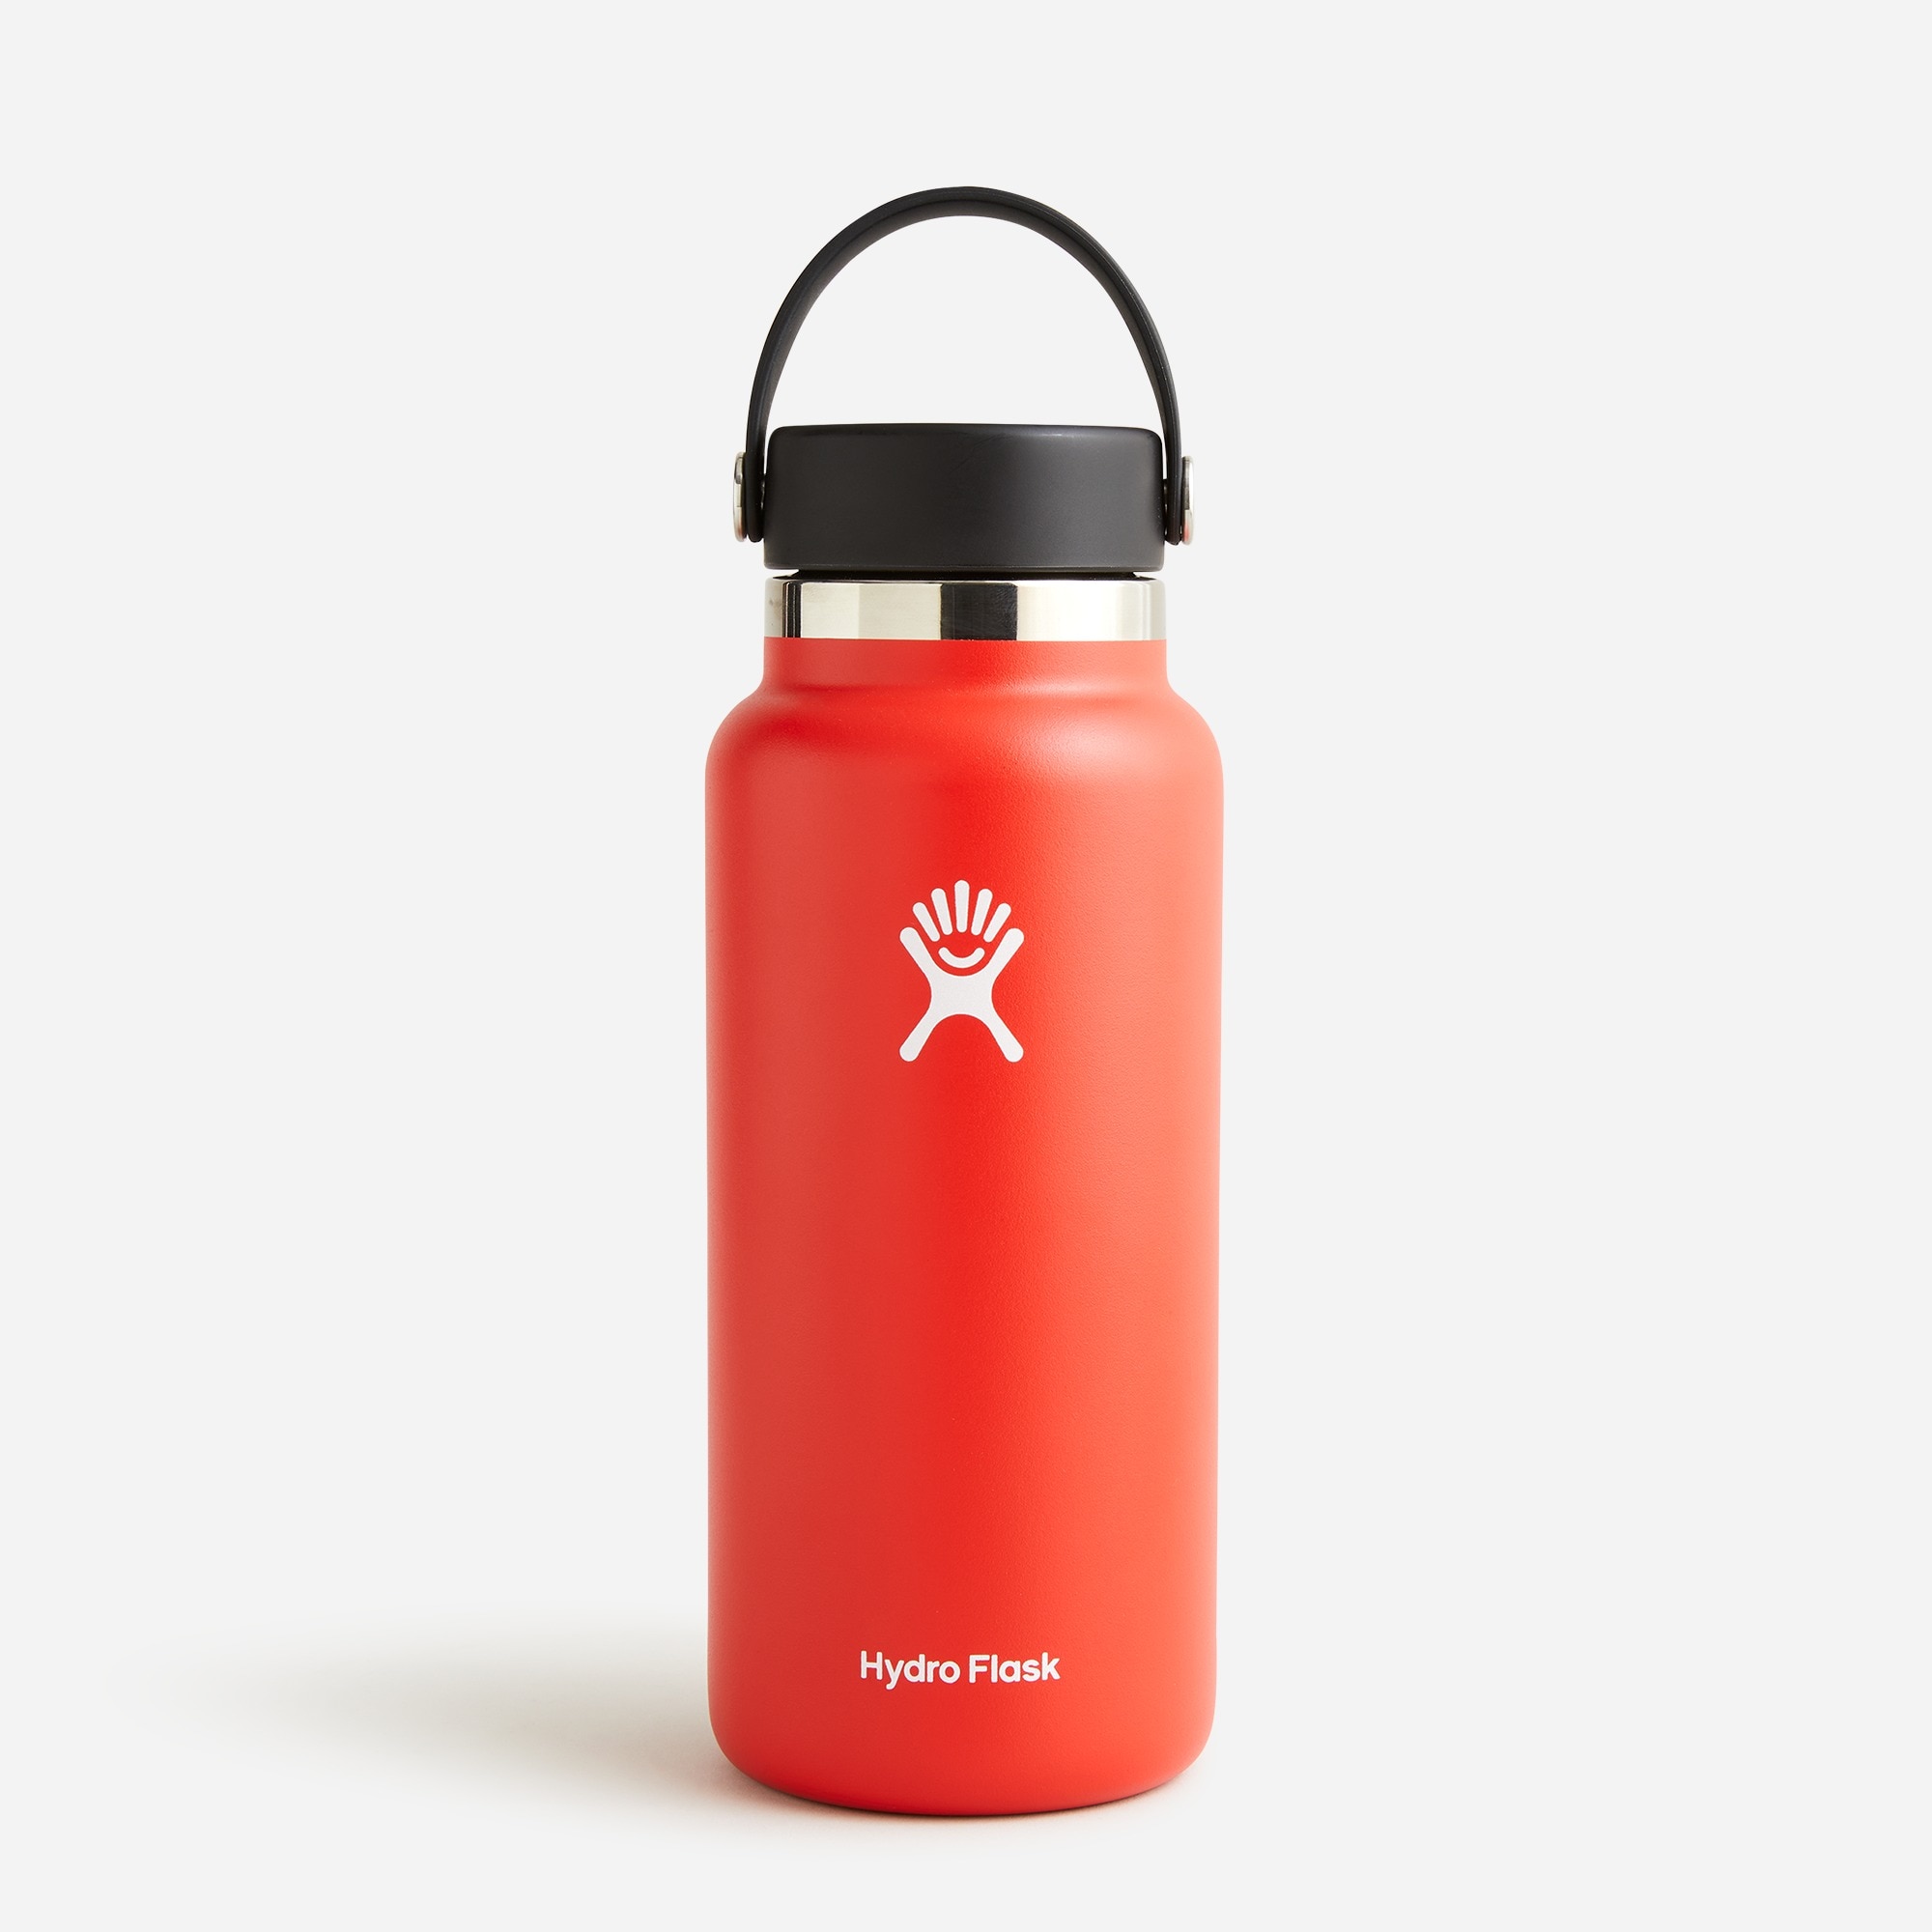 ISO 32 oz Copper Brown (new dude) : r/Hydroflask